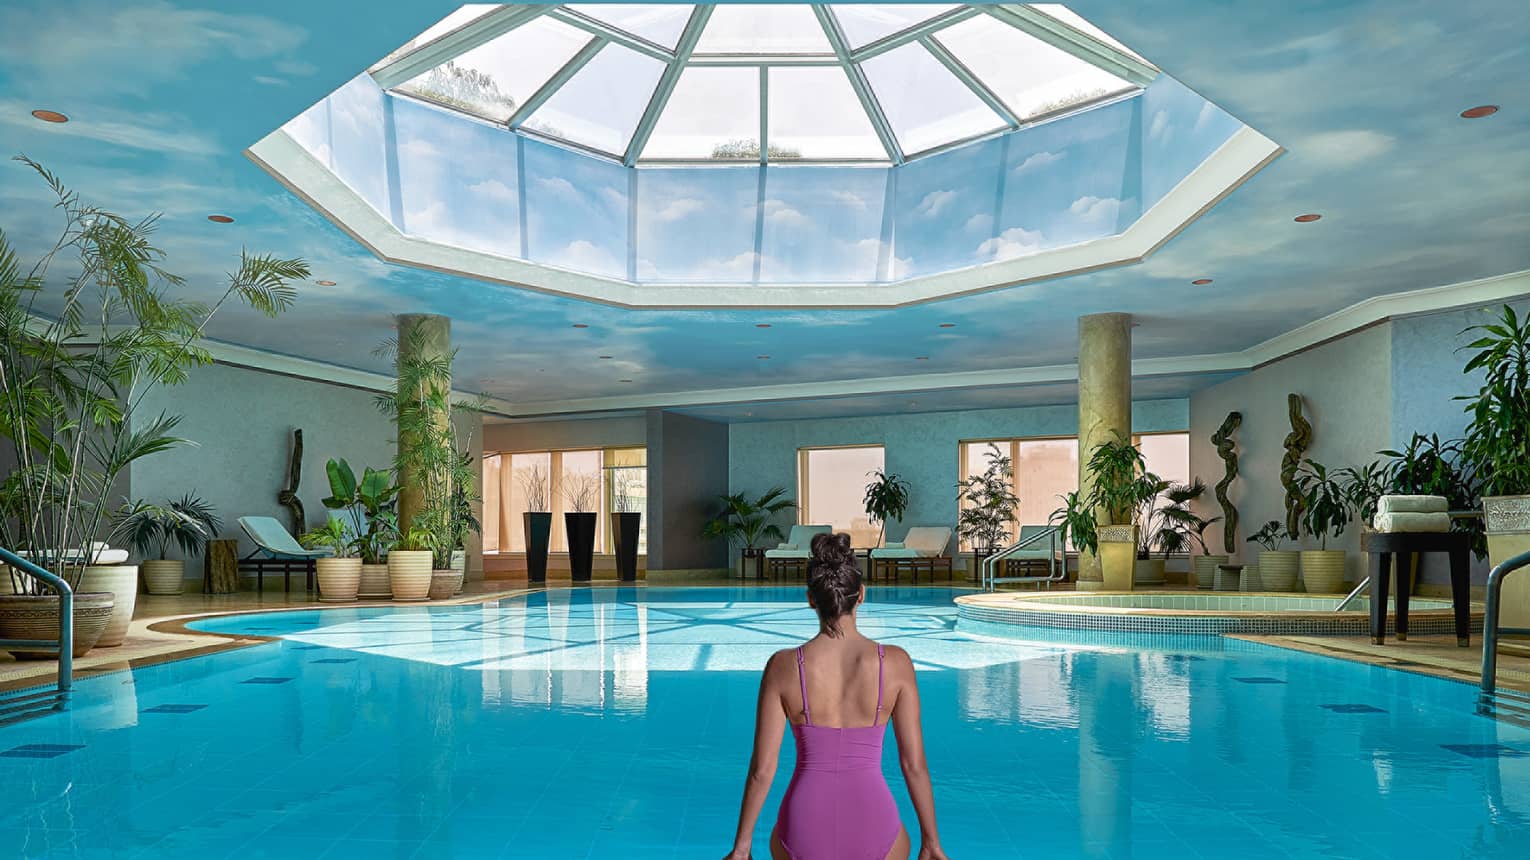 Woman in swimsuit seated on edge of indoor pool with blue ceiling and skylight above